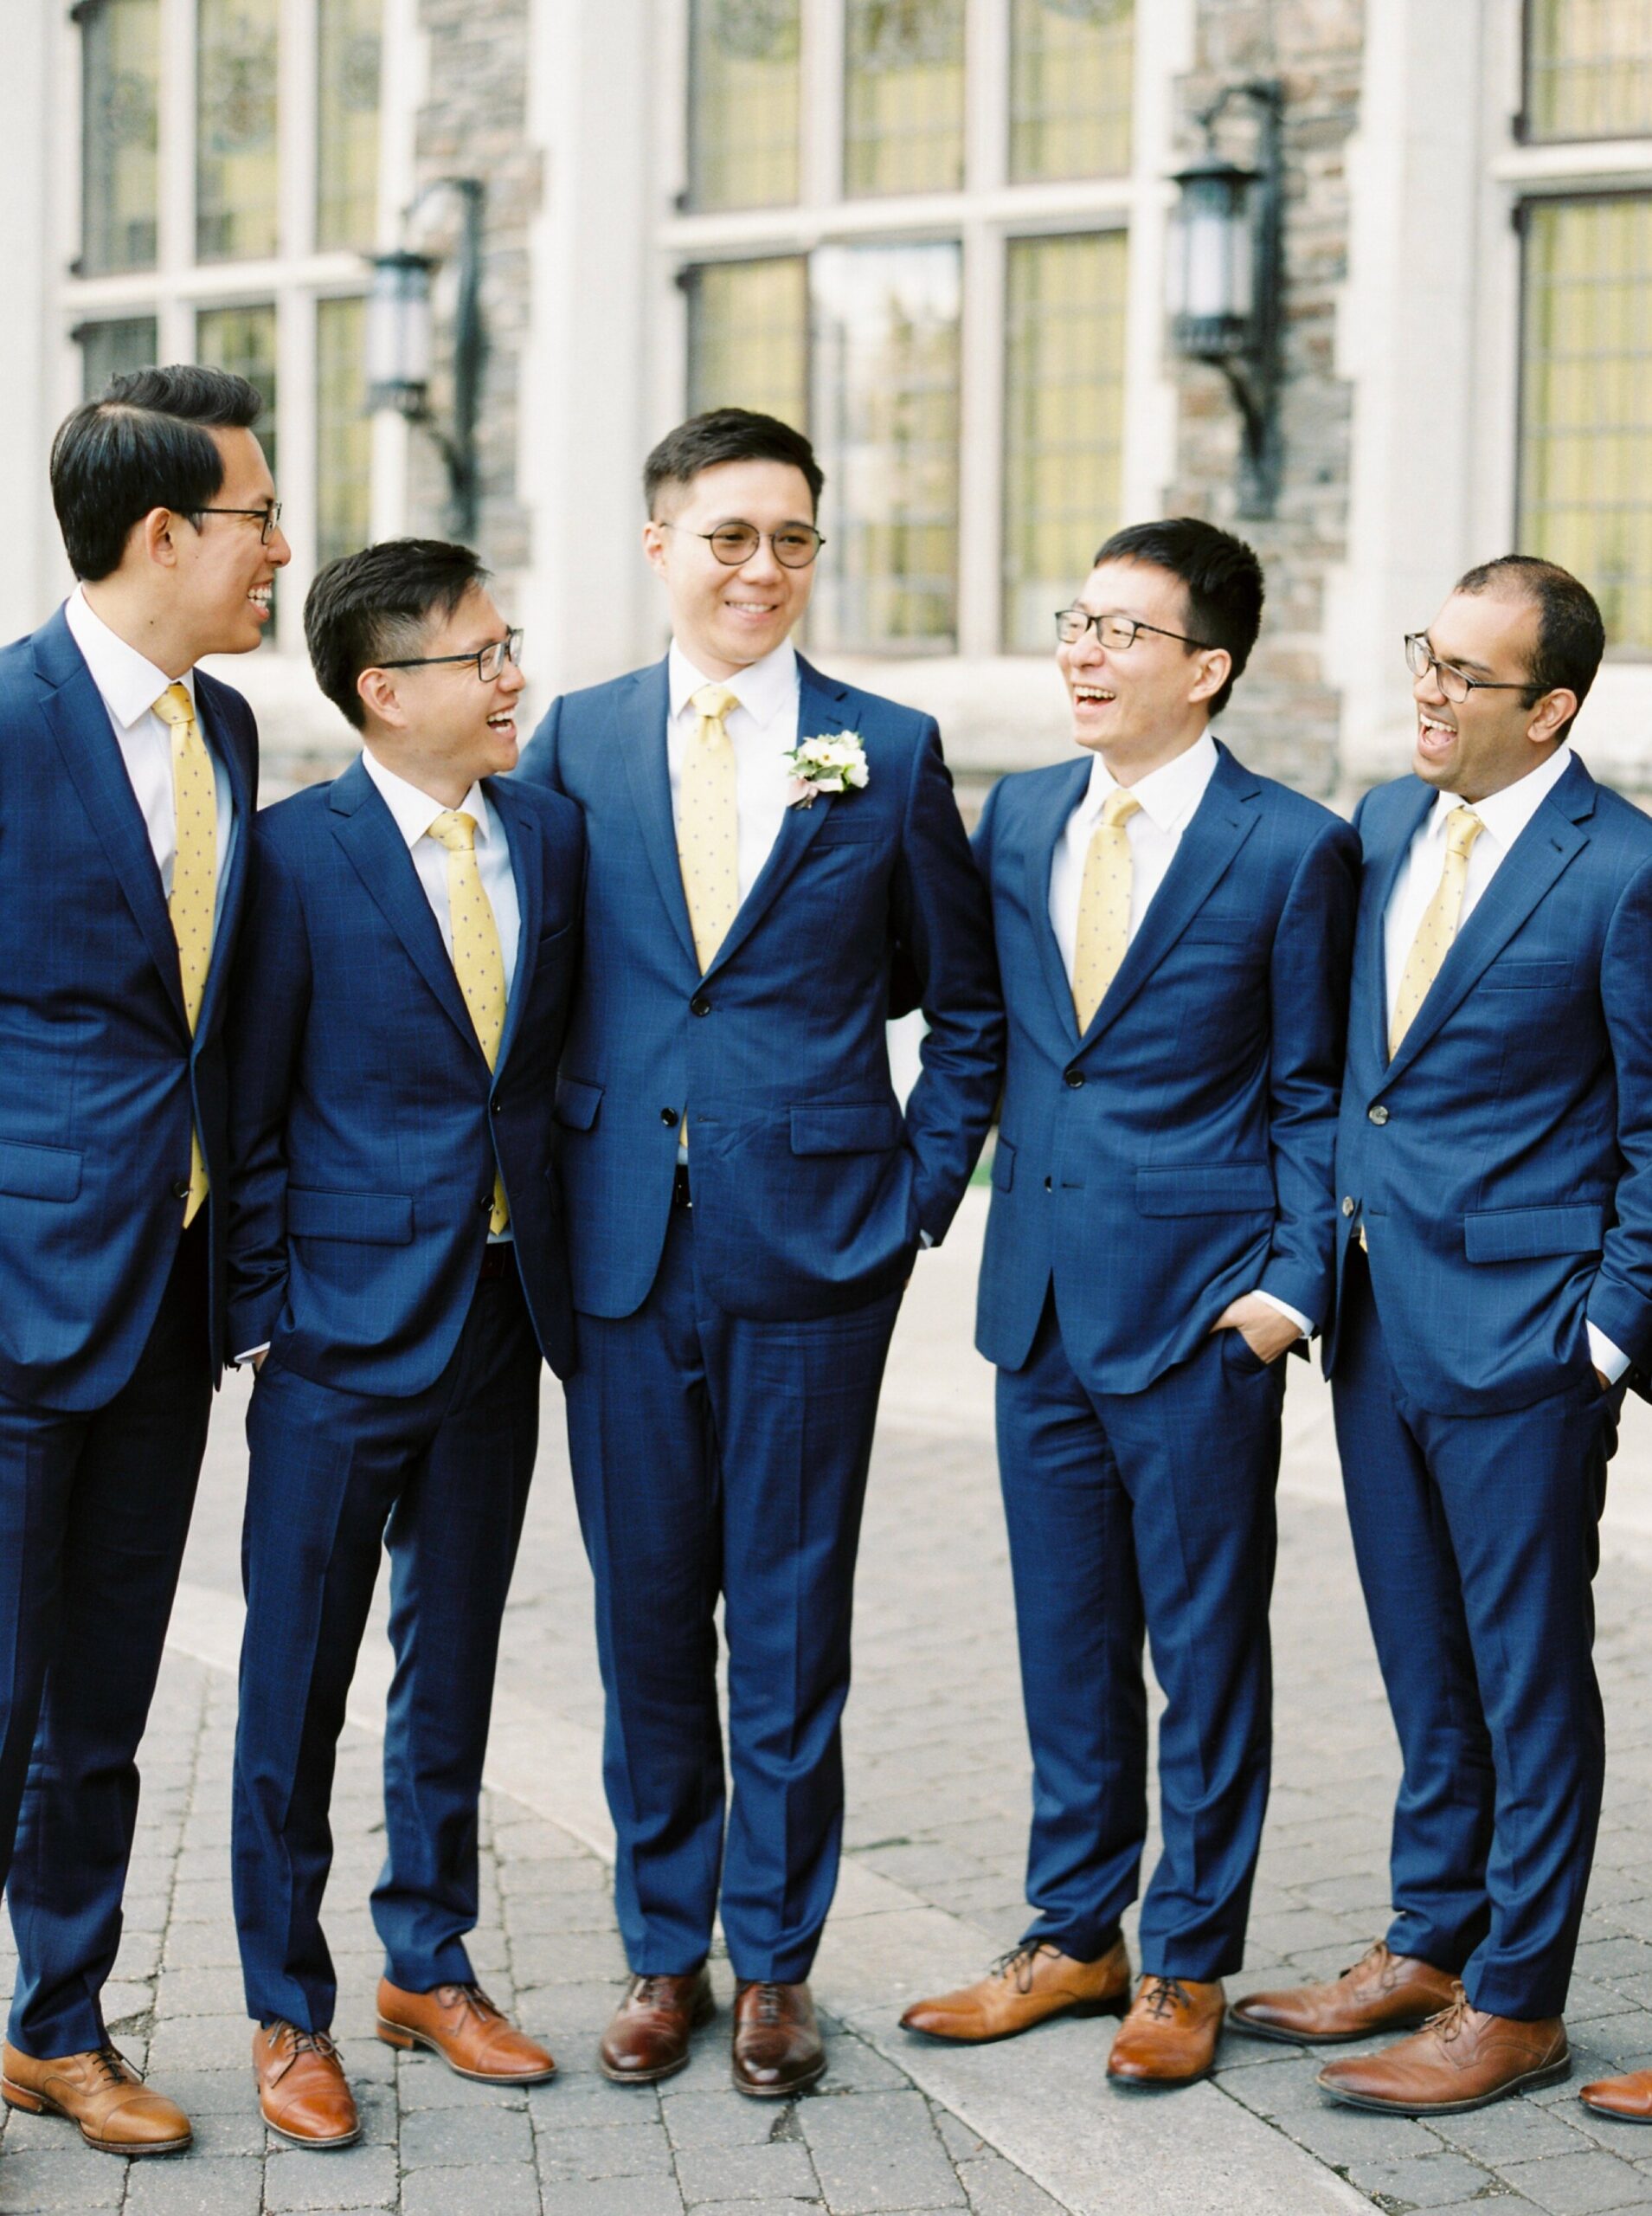  Groomsmesn in Navy blue suits and yellow ties | Fairmont Banff Springs hotel wedding photographers | fine art film photography | portra 400 